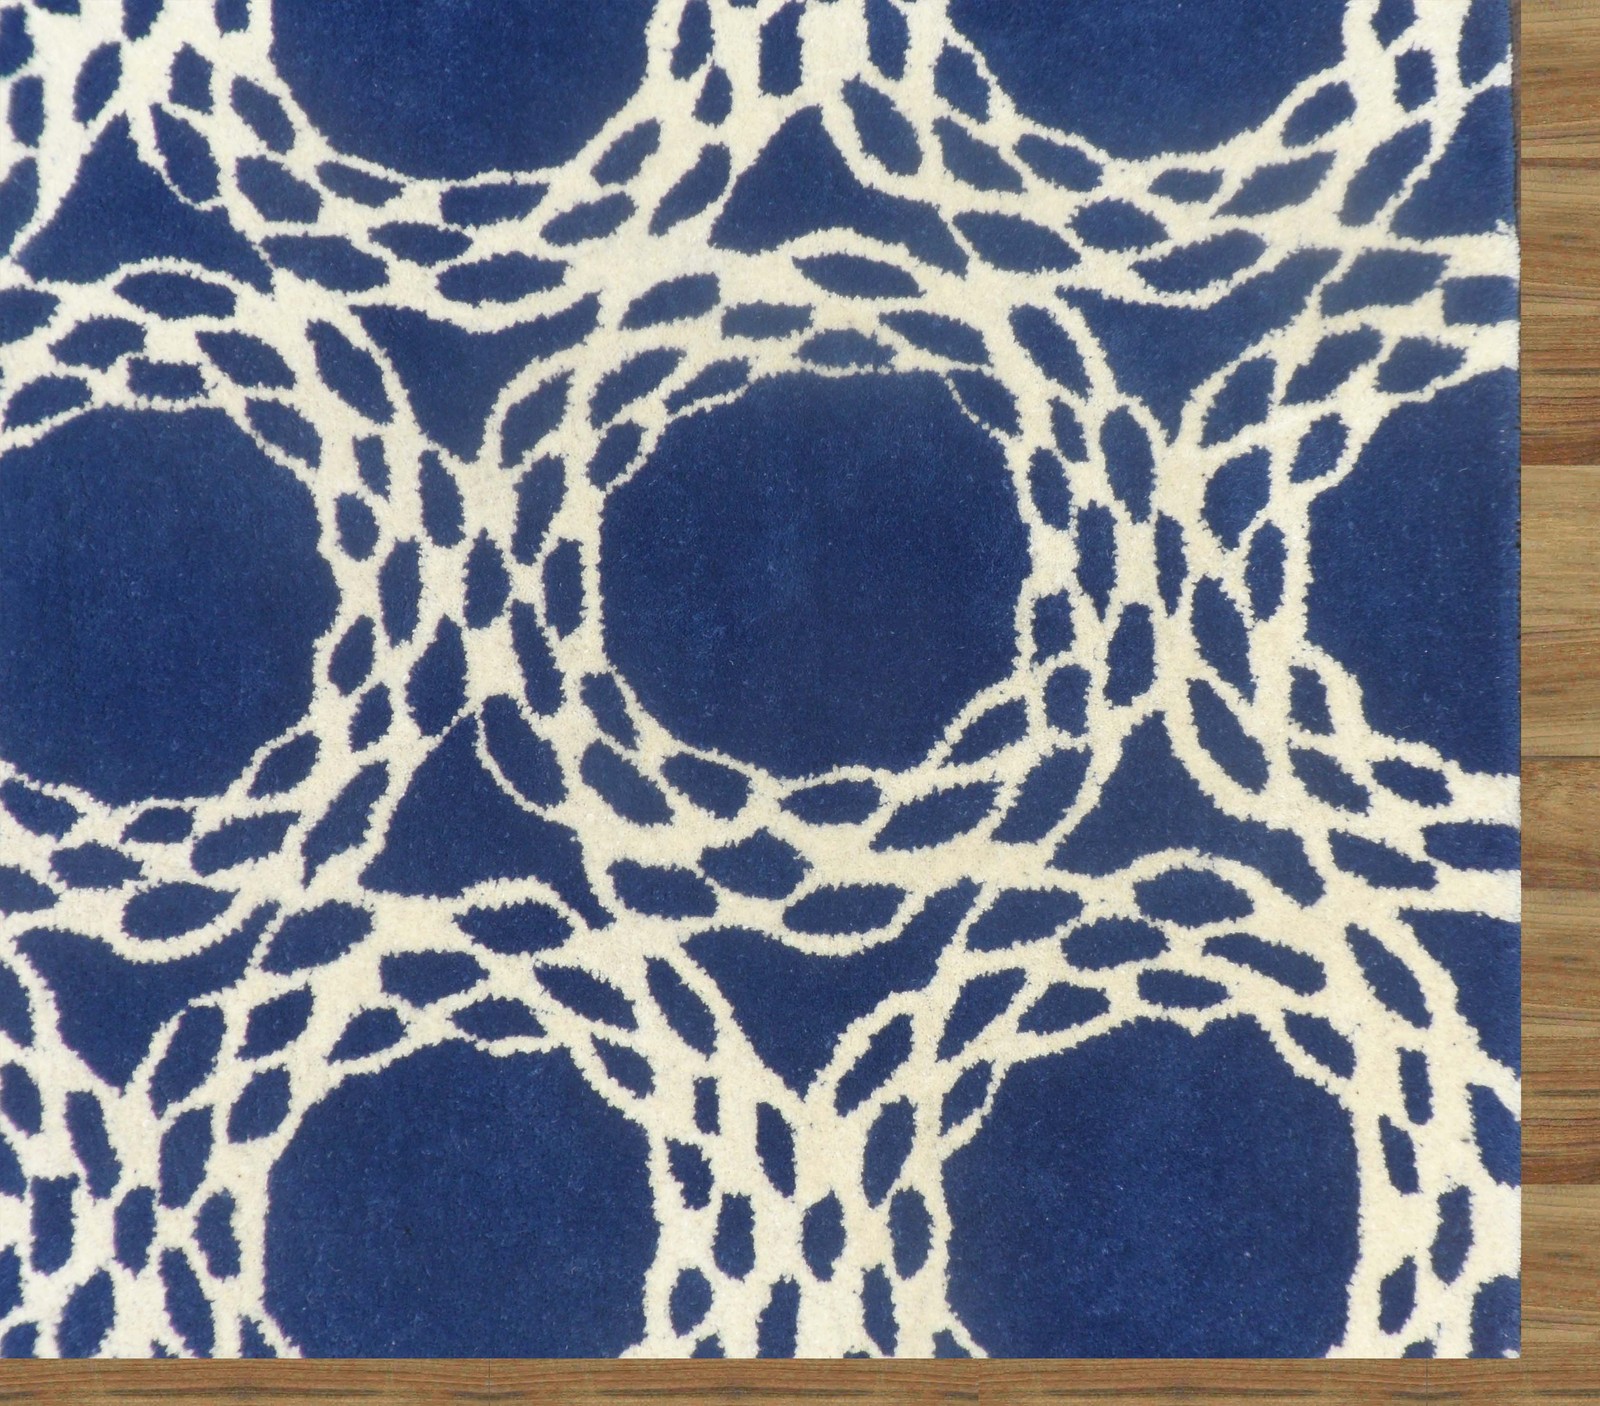 Primary image for Hand Tufted Arabesque Blue 9' x 12' Contemporary Woolen Area Rug Carpet